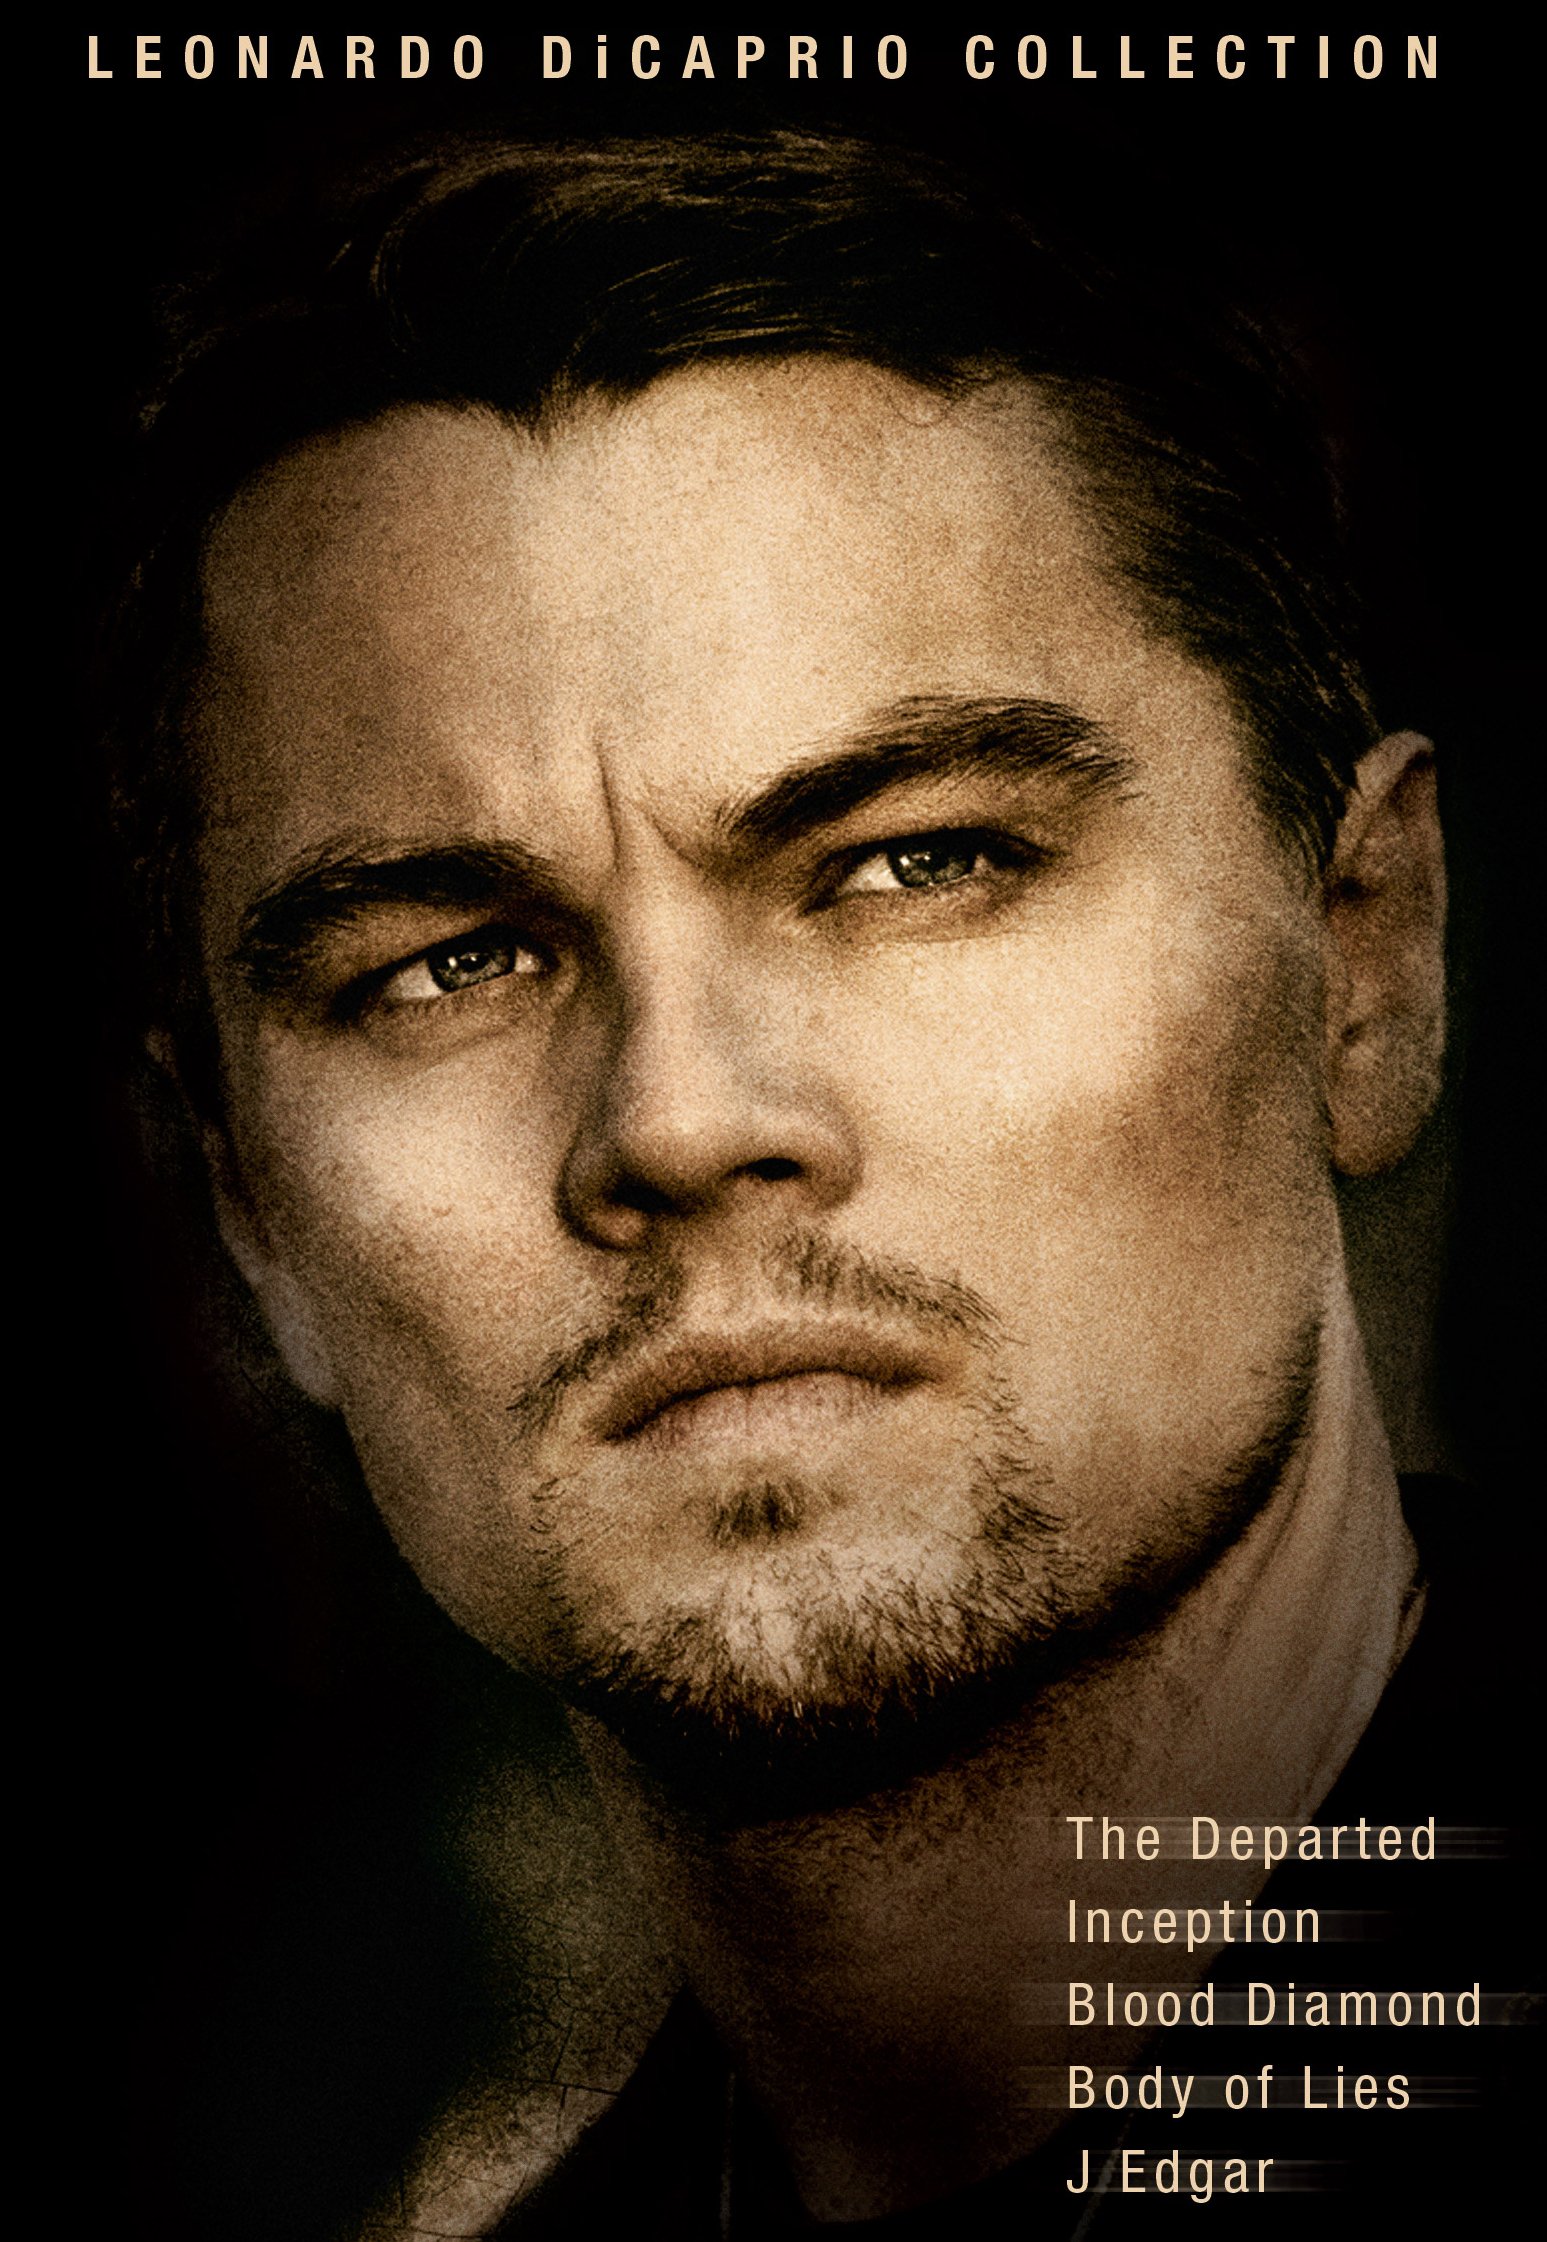 leo-set-of-5-movies-inception-the-departed-blood-diamond-body-of-lies-j-edgar